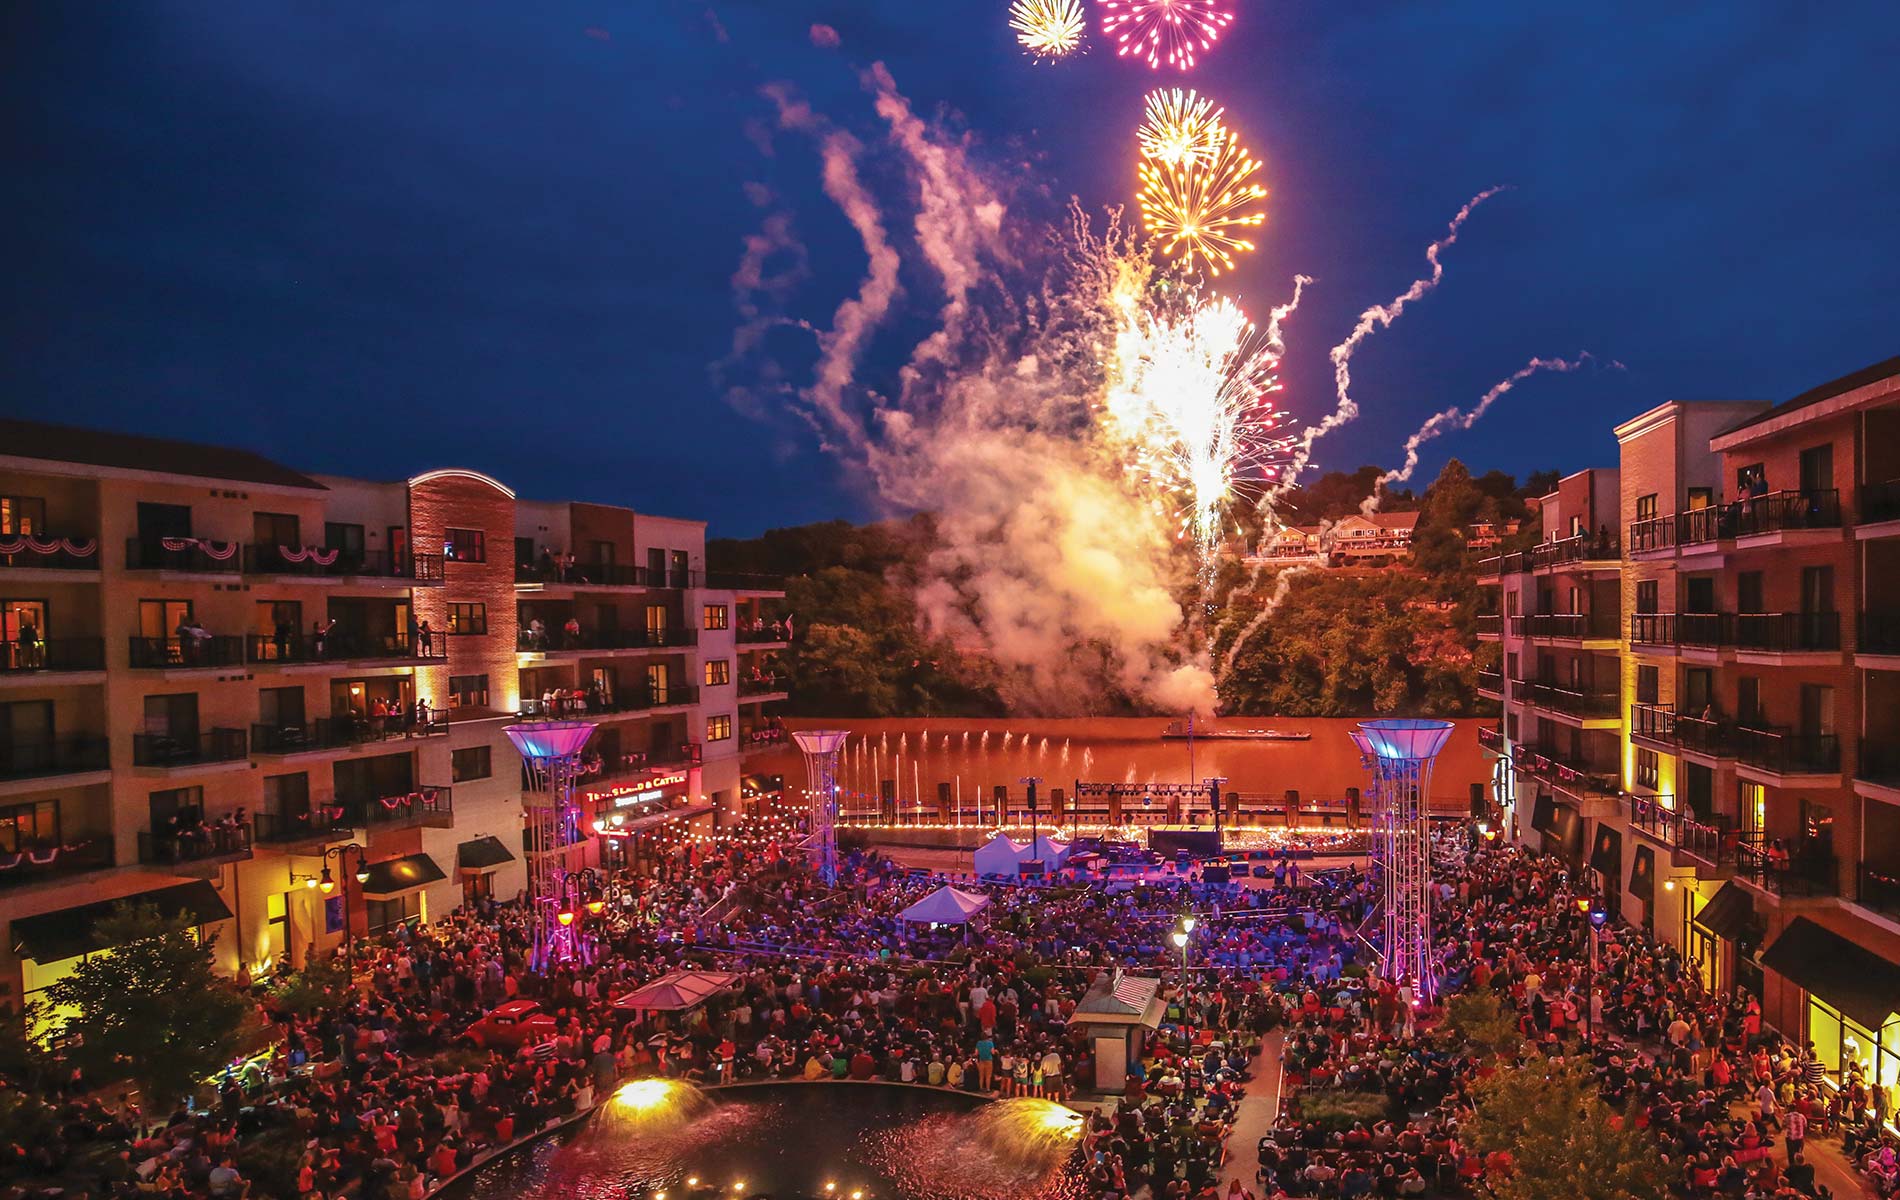 Branson Landing is a popular outdoor music venue in the city; the complex also includes a Hilton hotel, condos, over a hundred retail stores, restaurants, and more. Photo courtesy of Branson CVB